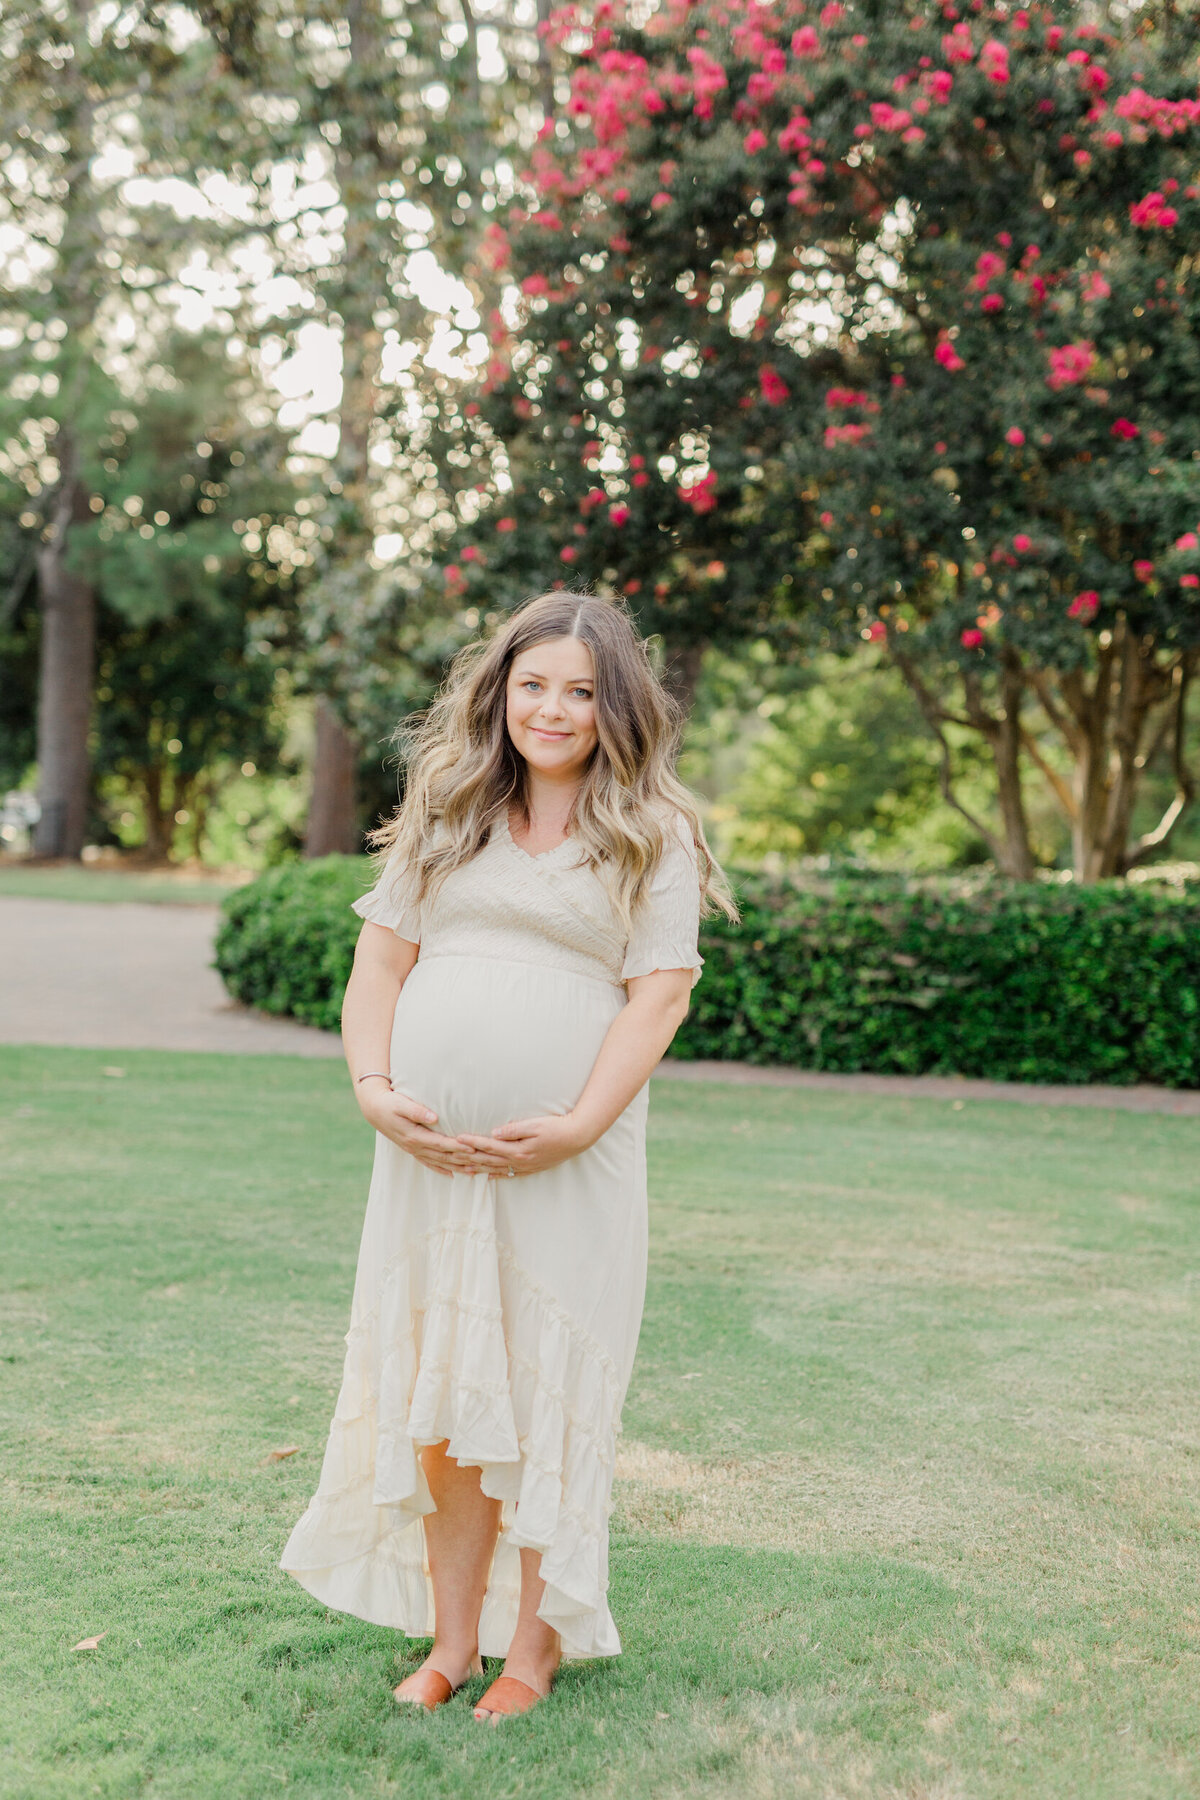 North-Raleigh-Maternity-Photography-Session-Danielle-Pressley24